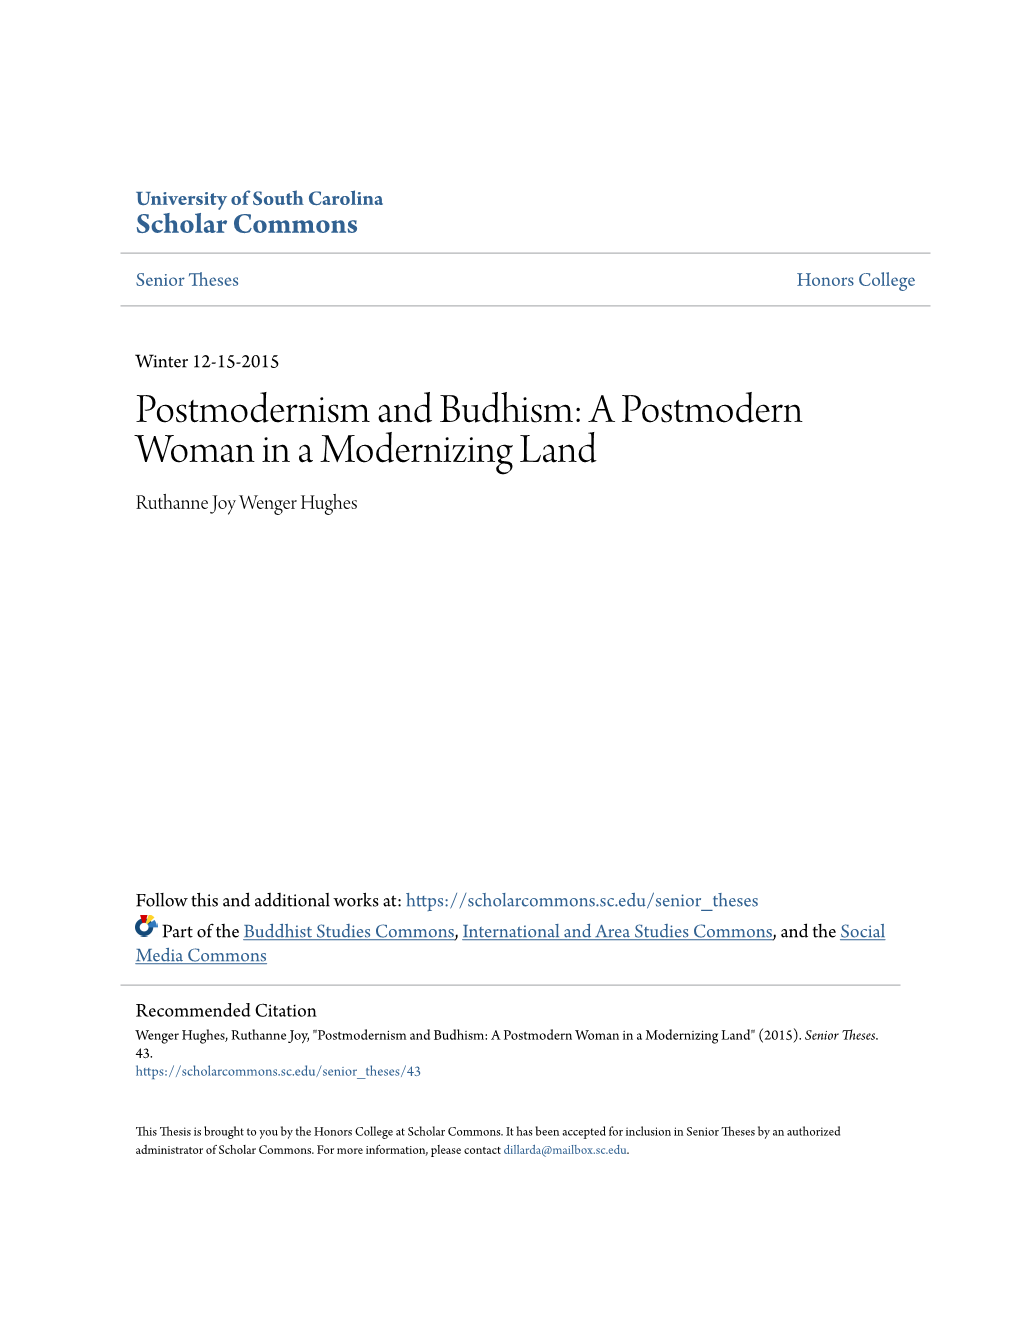 Postmodernism and Budhism: a Postmodern Woman in a Modernizing Land Ruthanne Joy Wenger Hughes